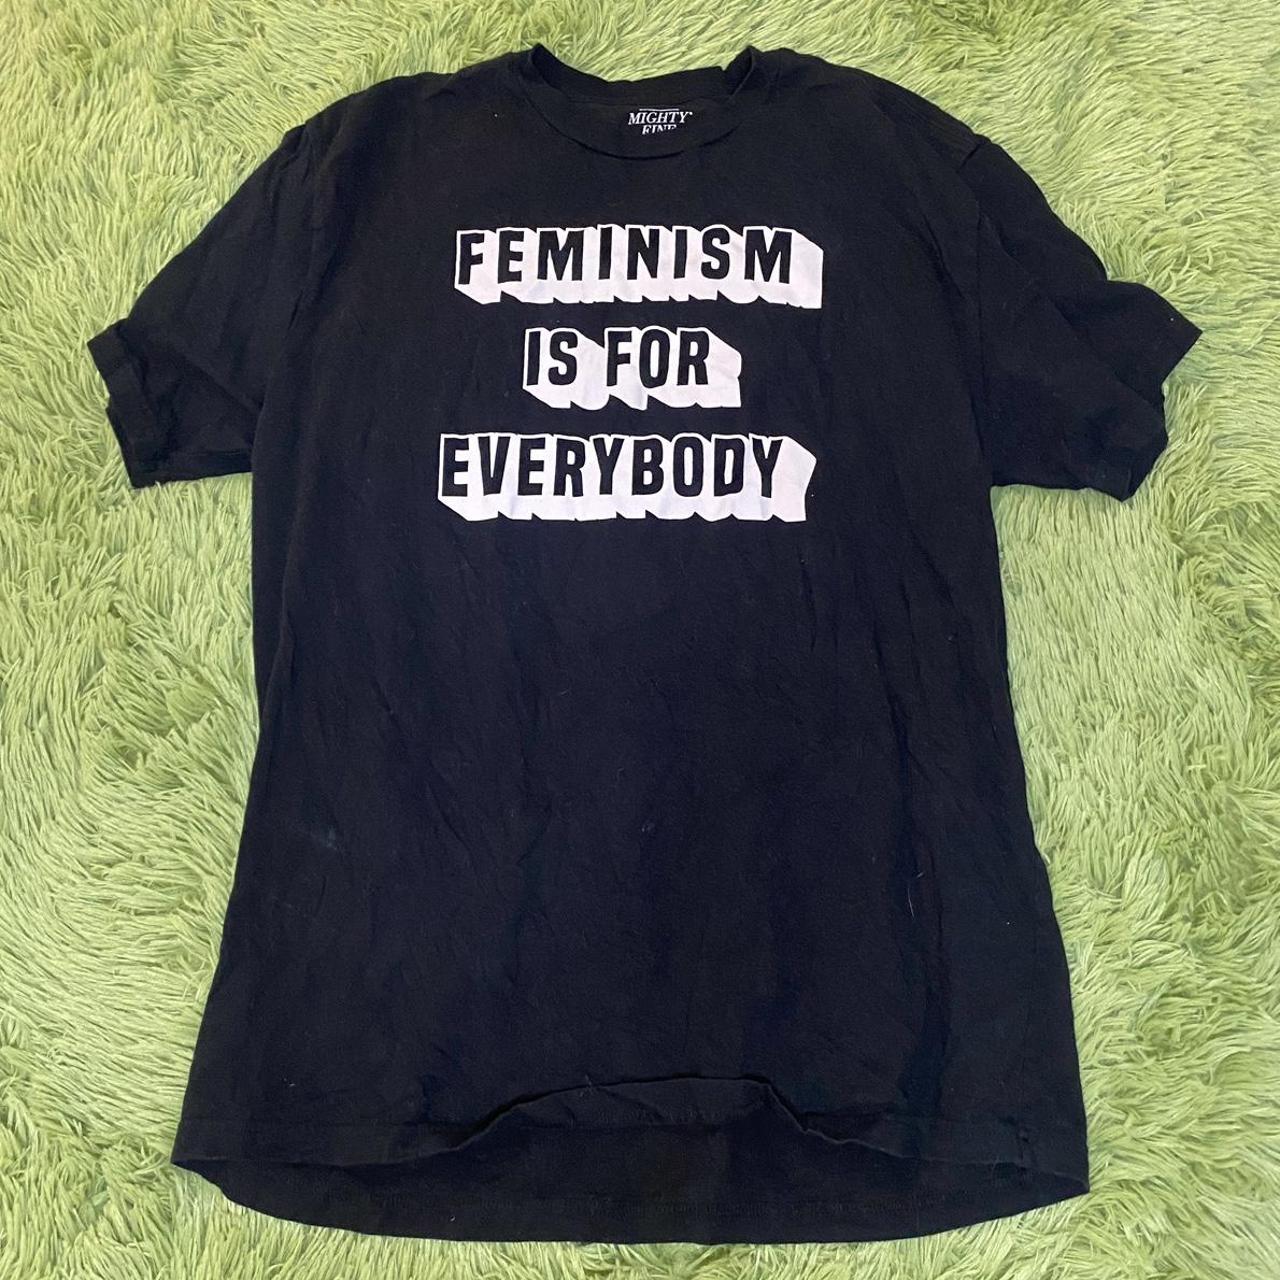 feminism is for everybody tee shirt size xl... - Depop